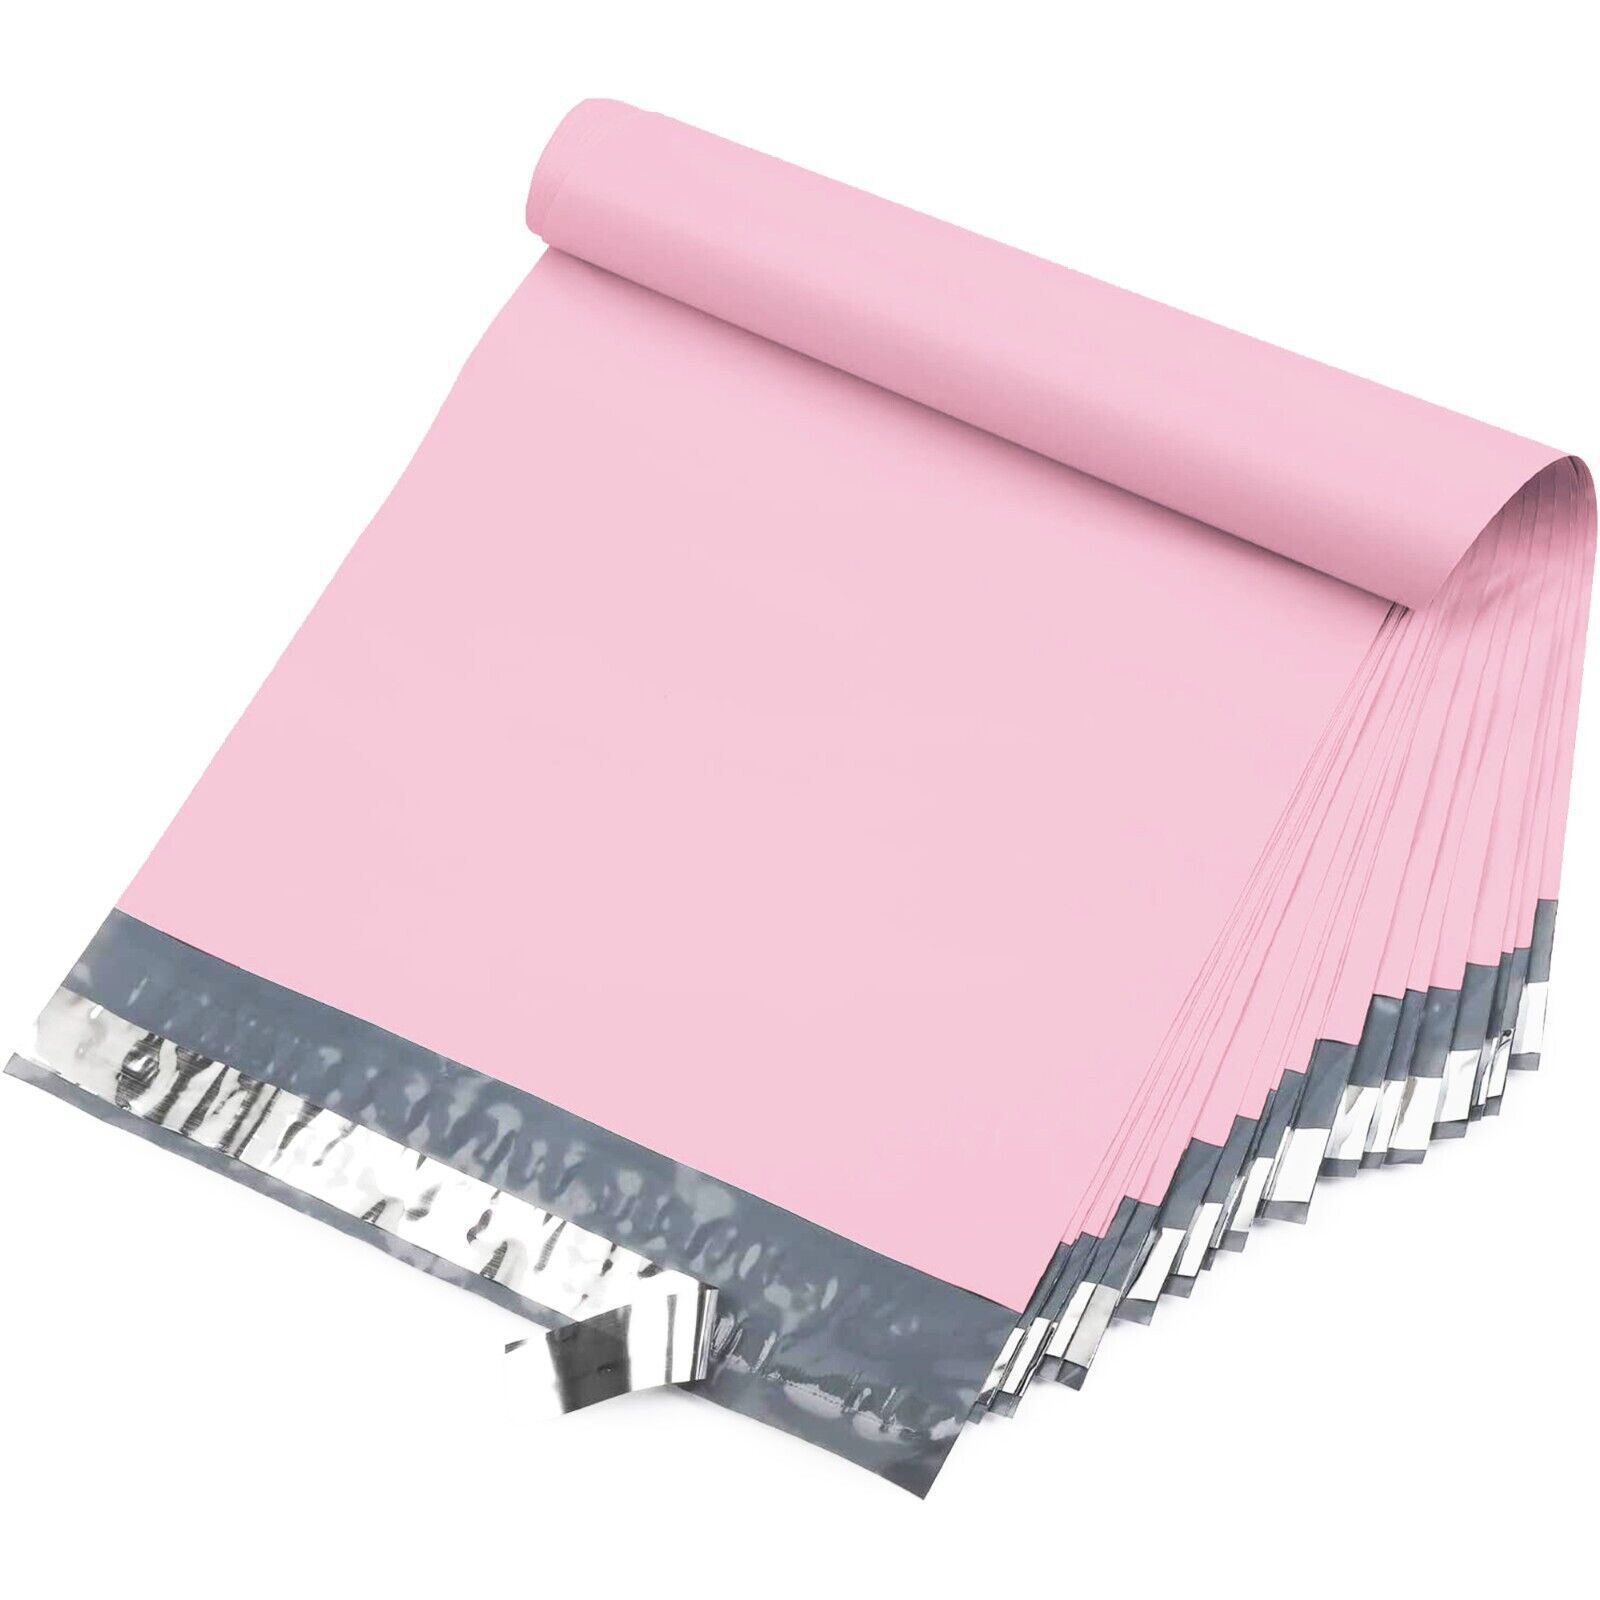 10X13 M4-1000pcs POLY MAILERS SHIPPING ENVELOPES PLASTIC BAGS-Light Pink